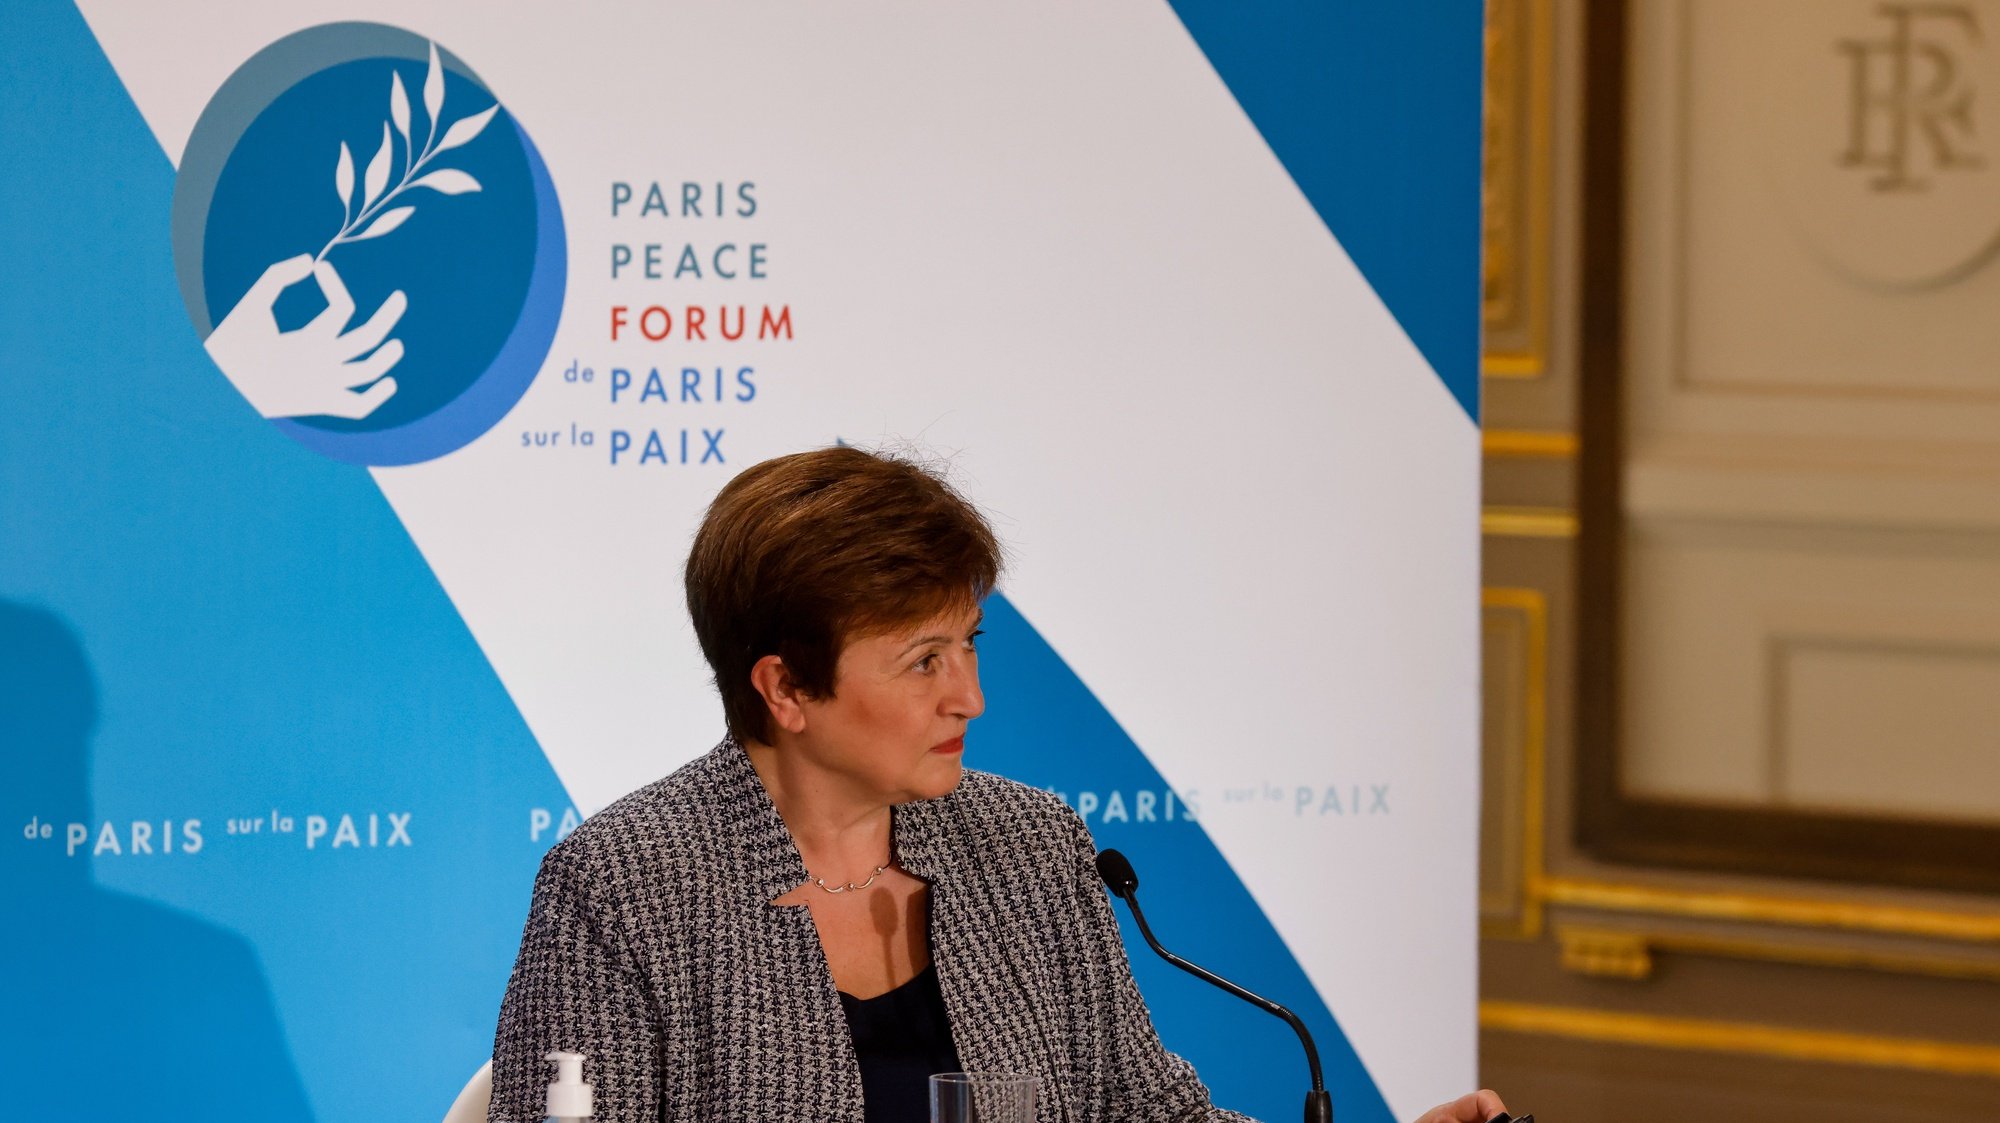 epa08815835 International Monetary Fund Managing Director Kristalina Georgieva attends The Paris Peace Forum at The Elysee Palace in Paris, France, 12 November 2020. Organisers of the French Paris Peace Forum say several countries and foundations are set to pledge more than 500 million US dollars for a global pool aimed at ensuring equitable access to coronavirus tests, treatment and vaccines for all nations.  EPA/LUDOVIC MARIN / POOL  MAXPPP OUT